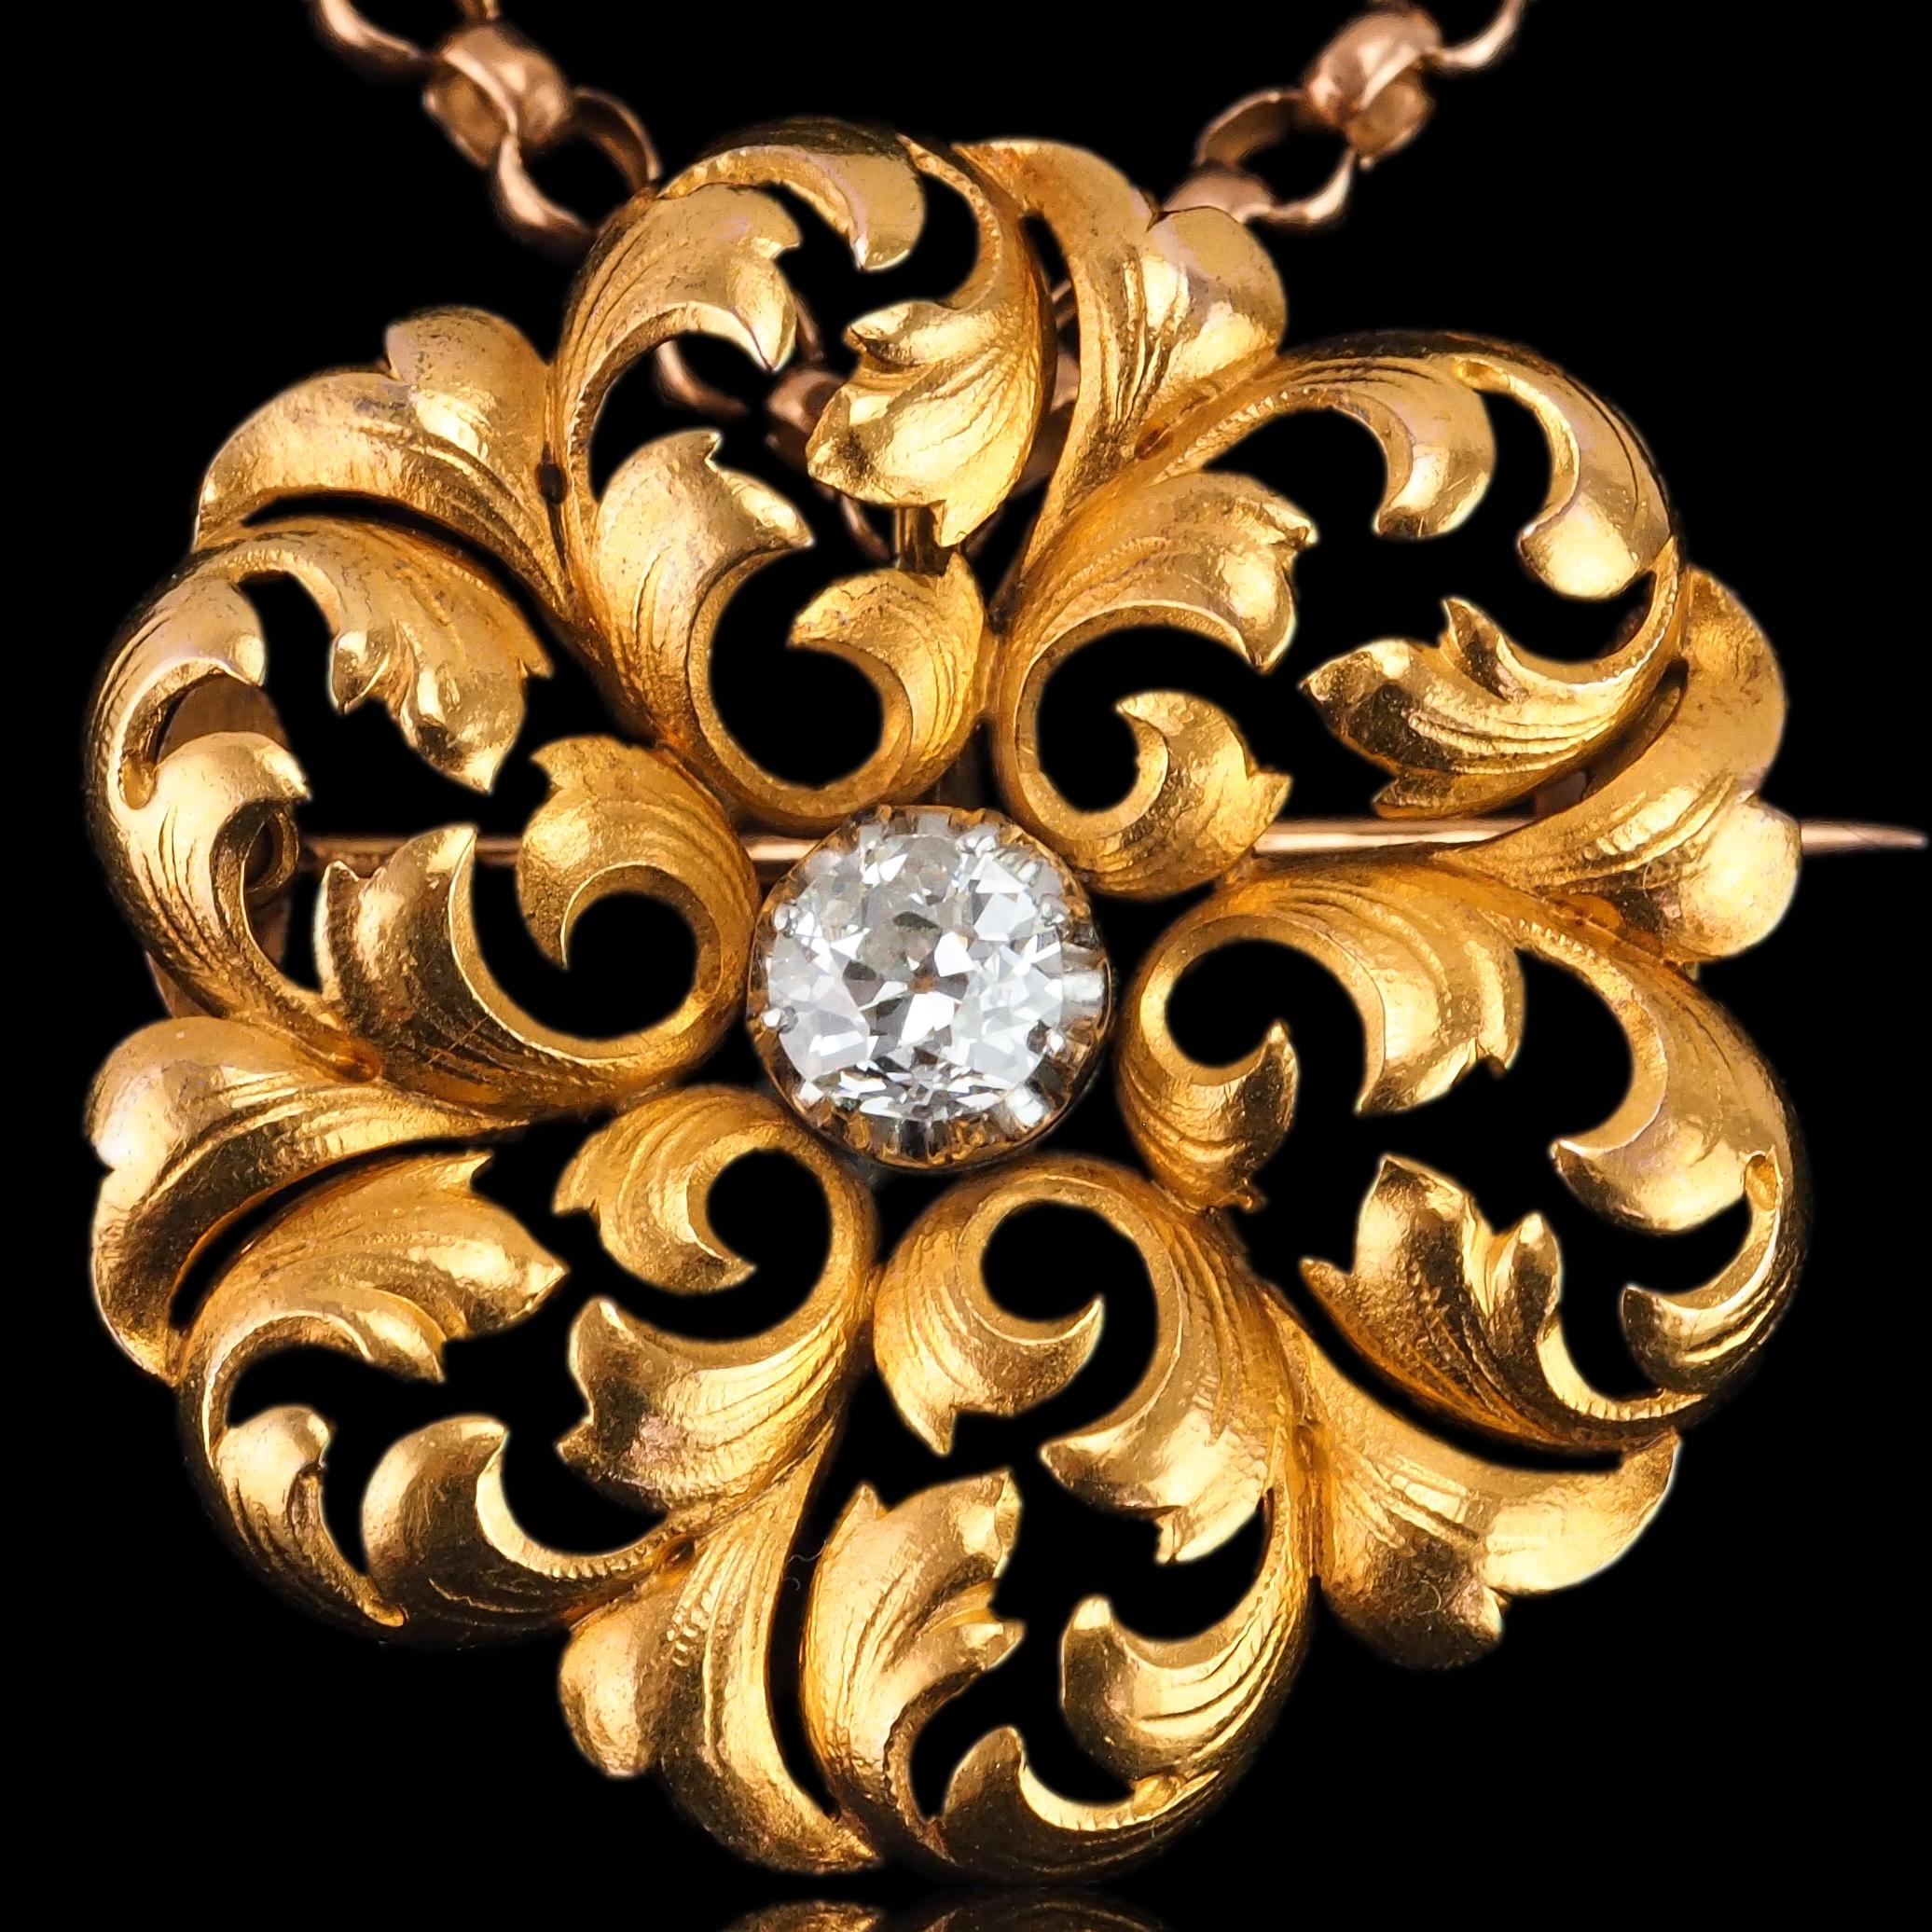 Antique French Diamond Necklace 18K Gold Pendant Brooch 19th C. Flower Acanthus In Good Condition For Sale In London, GB